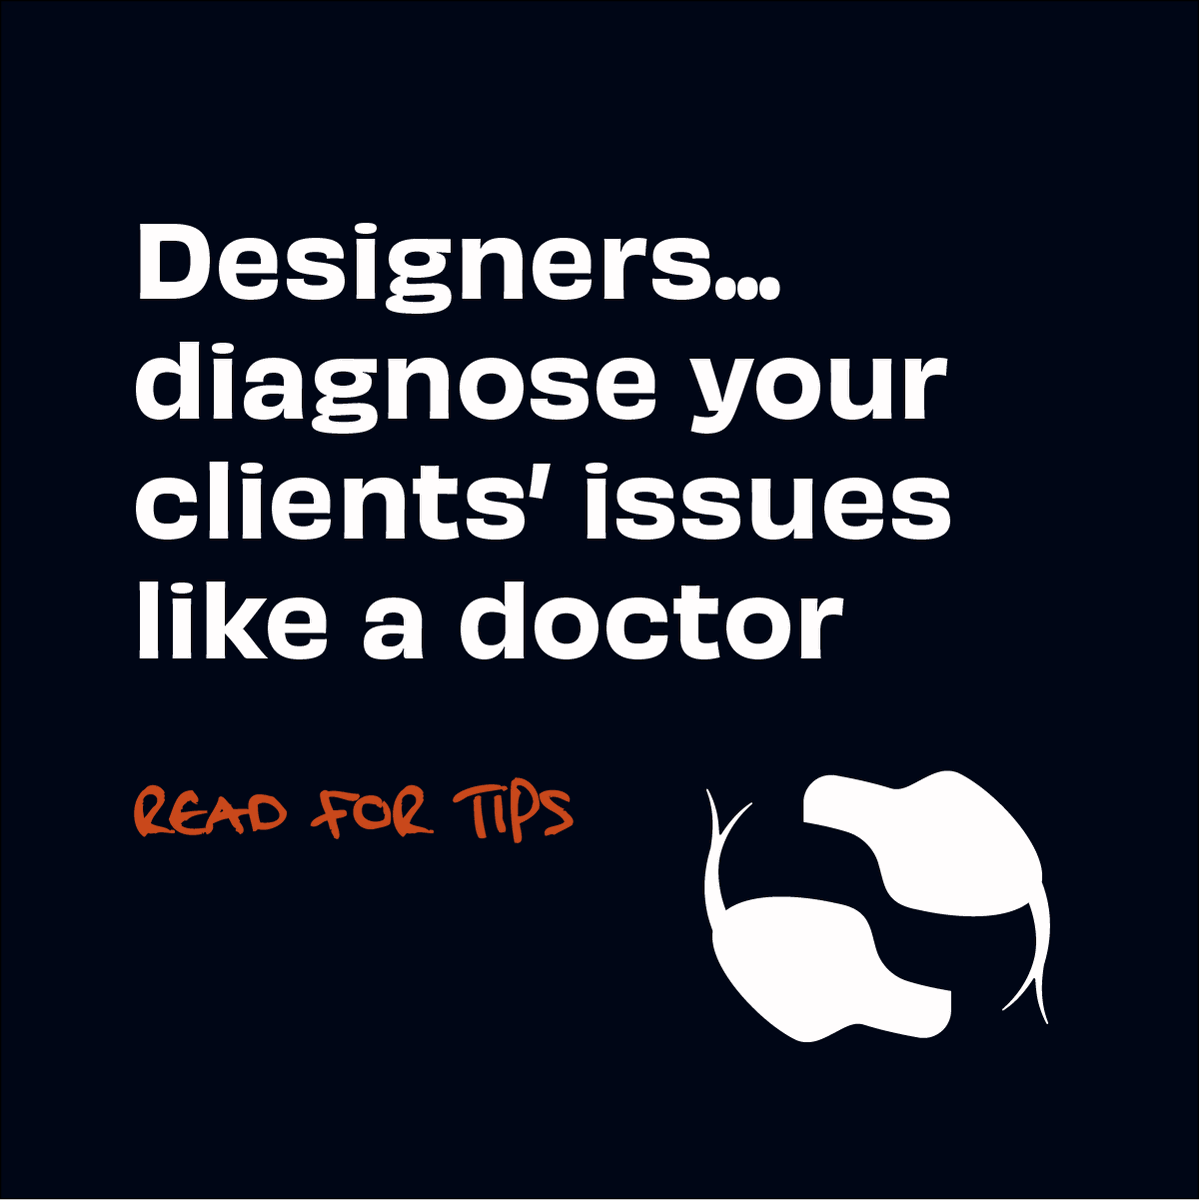 Does being a doctor help my work as a designer? Check out my latest post on LinkedIn linkedin.com/posts/thomas-n…